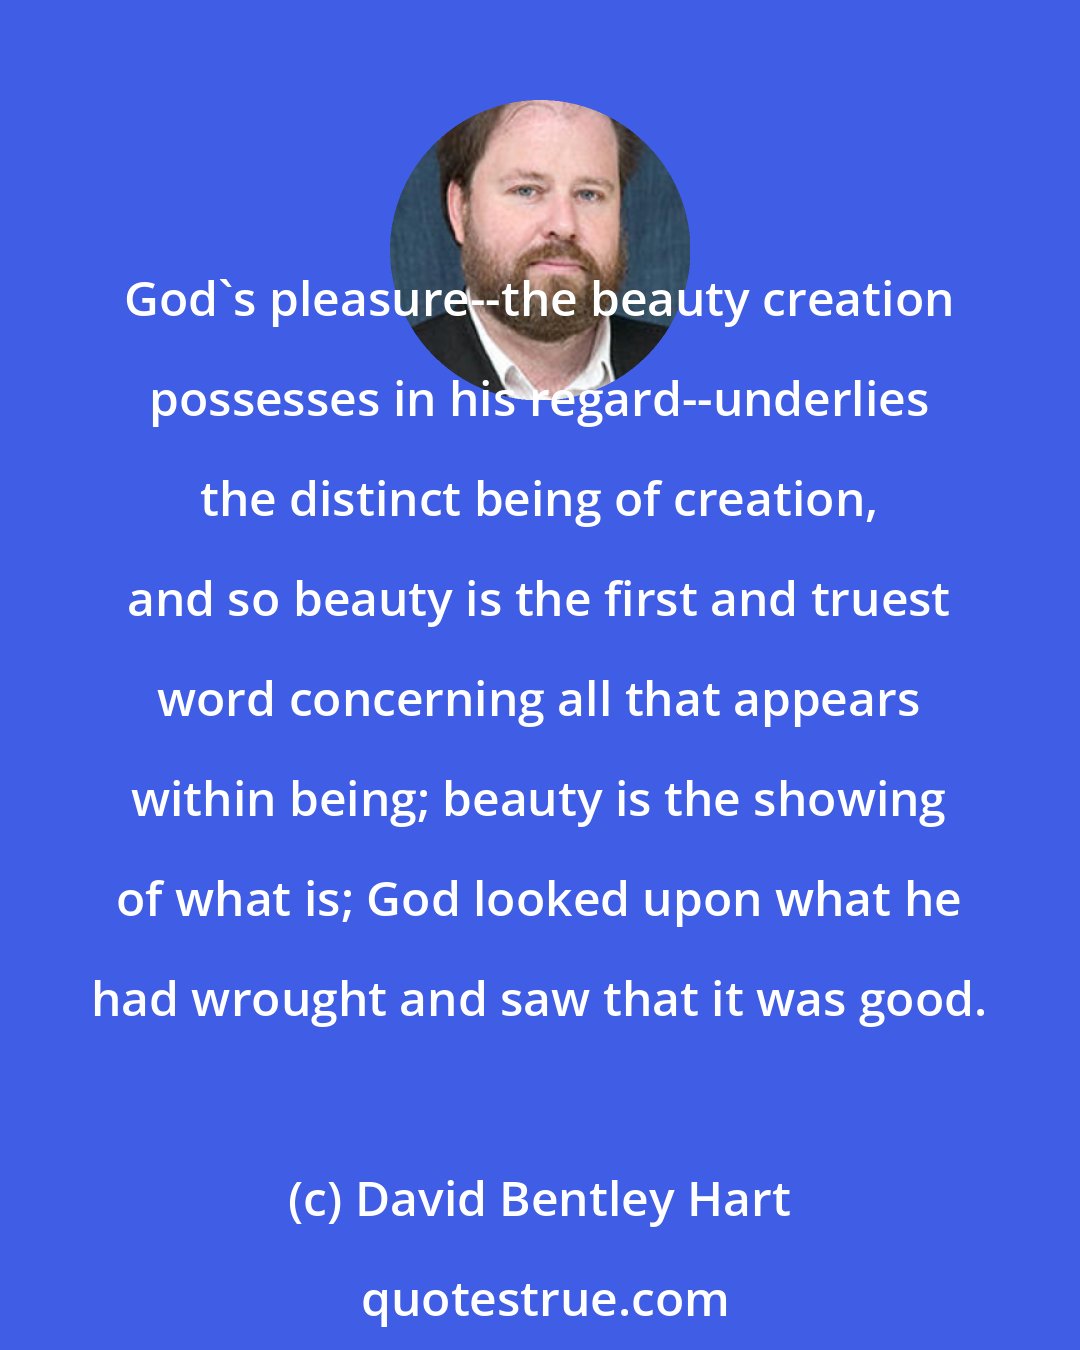 David Bentley Hart: God's pleasure--the beauty creation possesses in his regard--underlies the distinct being of creation, and so beauty is the first and truest word concerning all that appears within being; beauty is the showing of what is; God looked upon what he had wrought and saw that it was good.